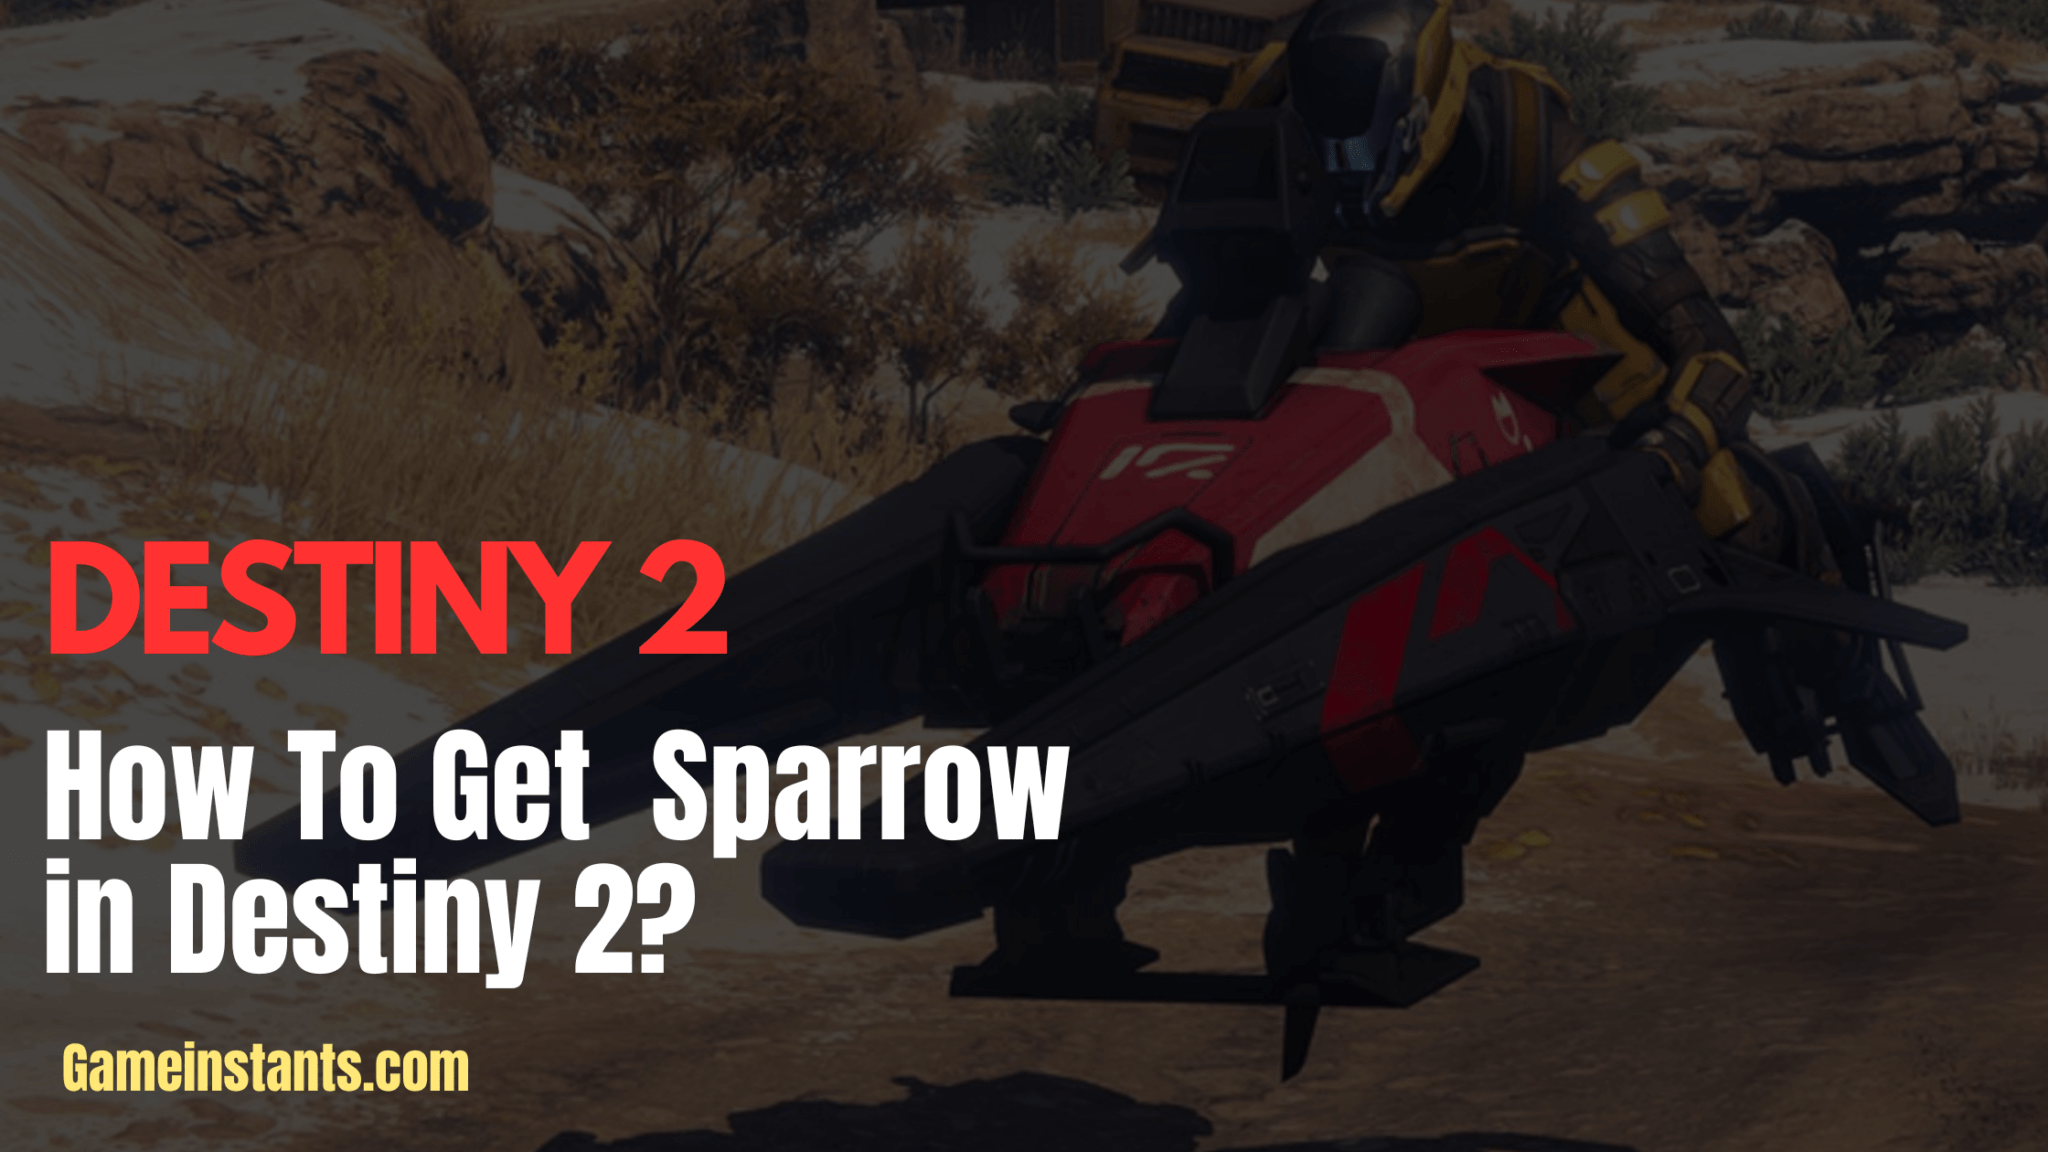 When Do You Get A Sparrow In Destiny 2? Gameinstants